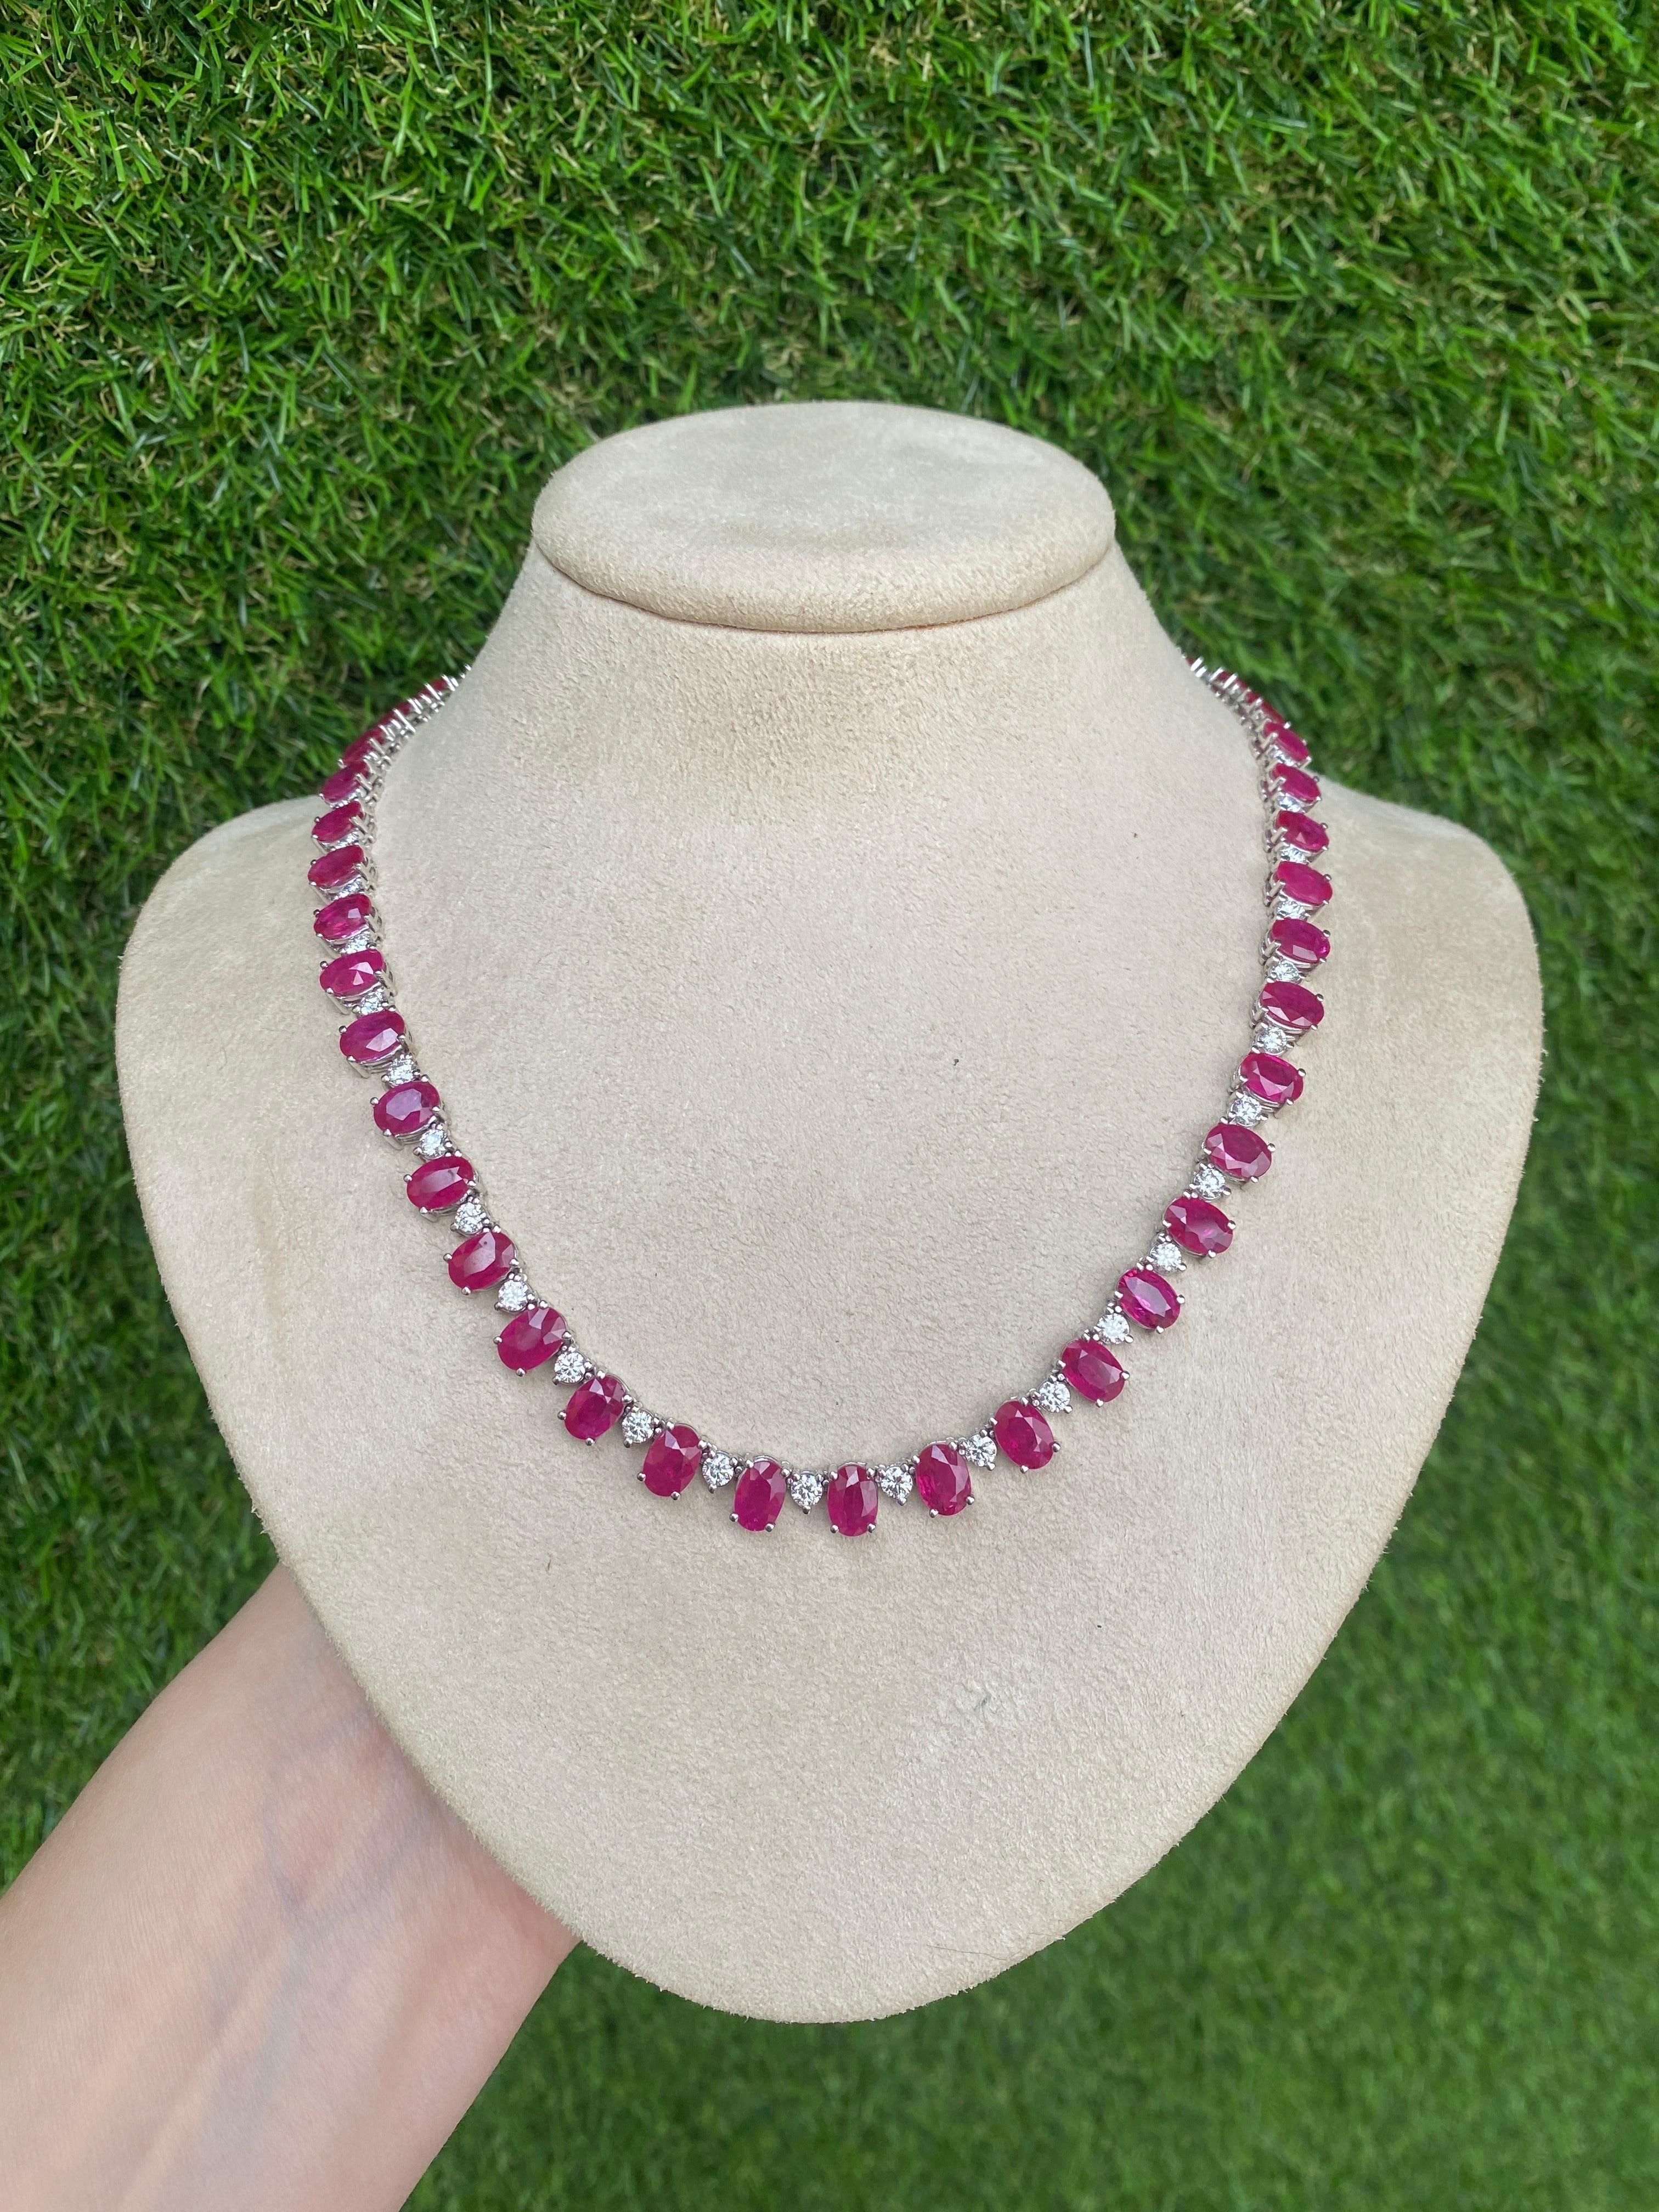 40.50ctw Natural Oval Cut Ruby & 5.20ctw Round Diamond Cocktail Necklace 8